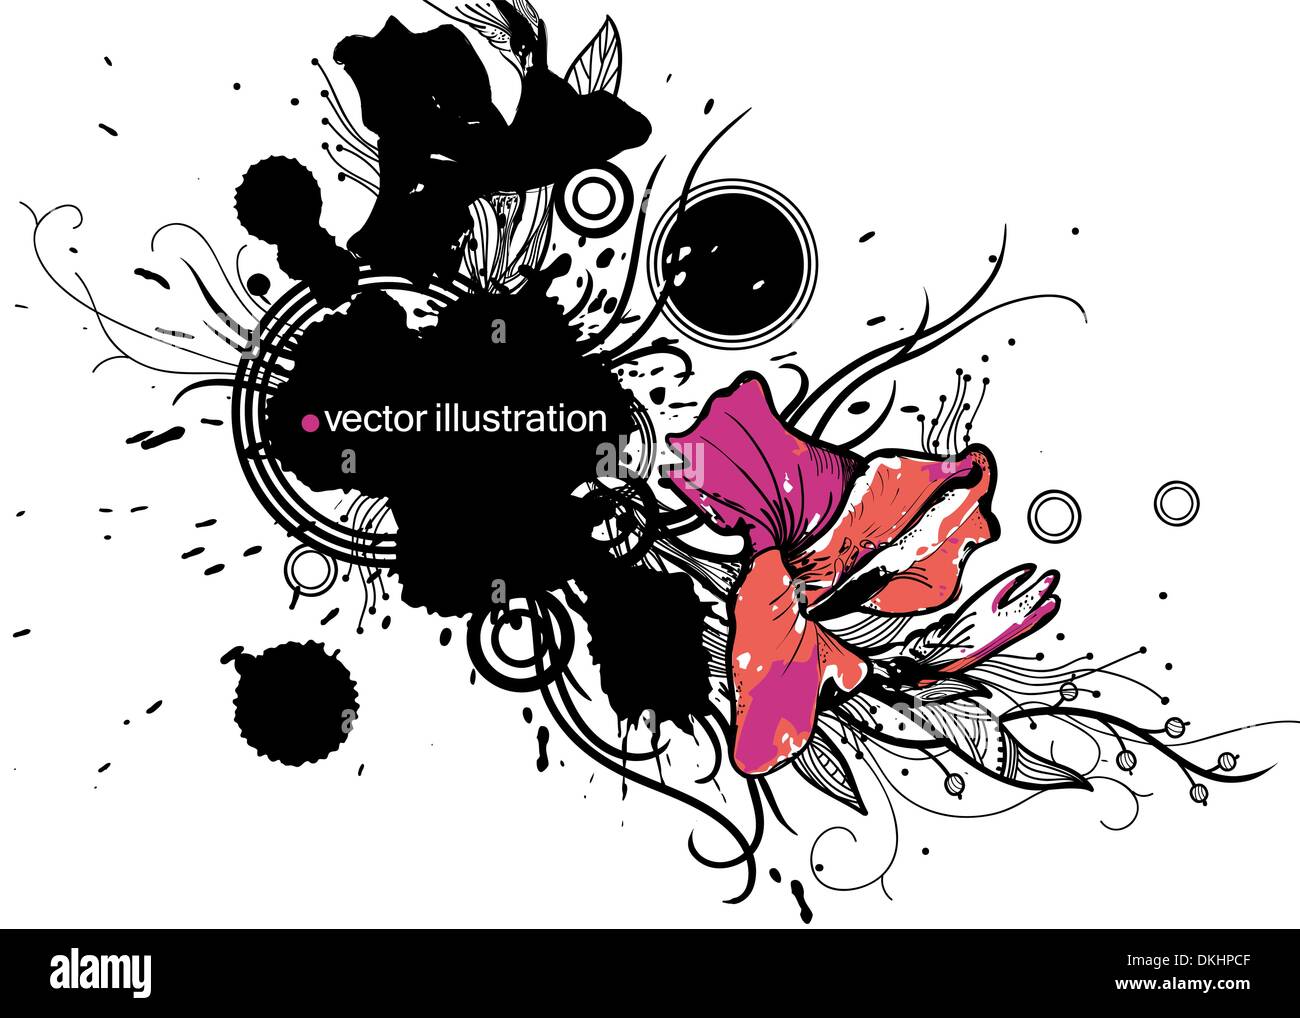 floral vector illustration of colorful gladiolus and abstract plants Stock Vector